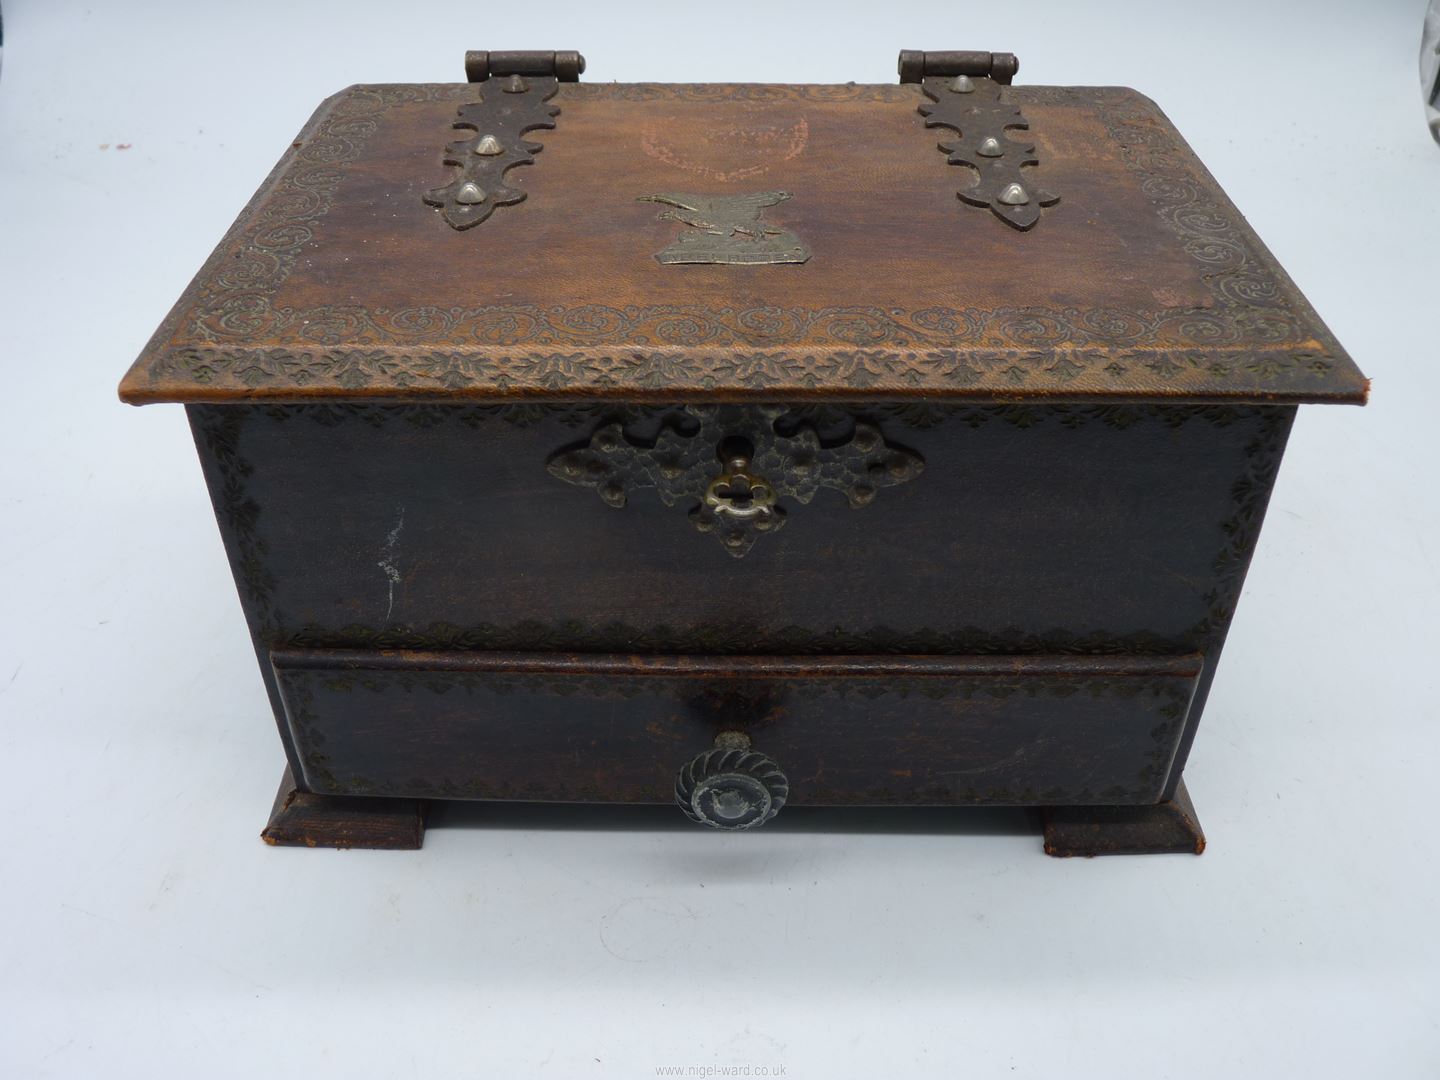 An embossed leather covered Jewellery Box with metal hinges and handles,